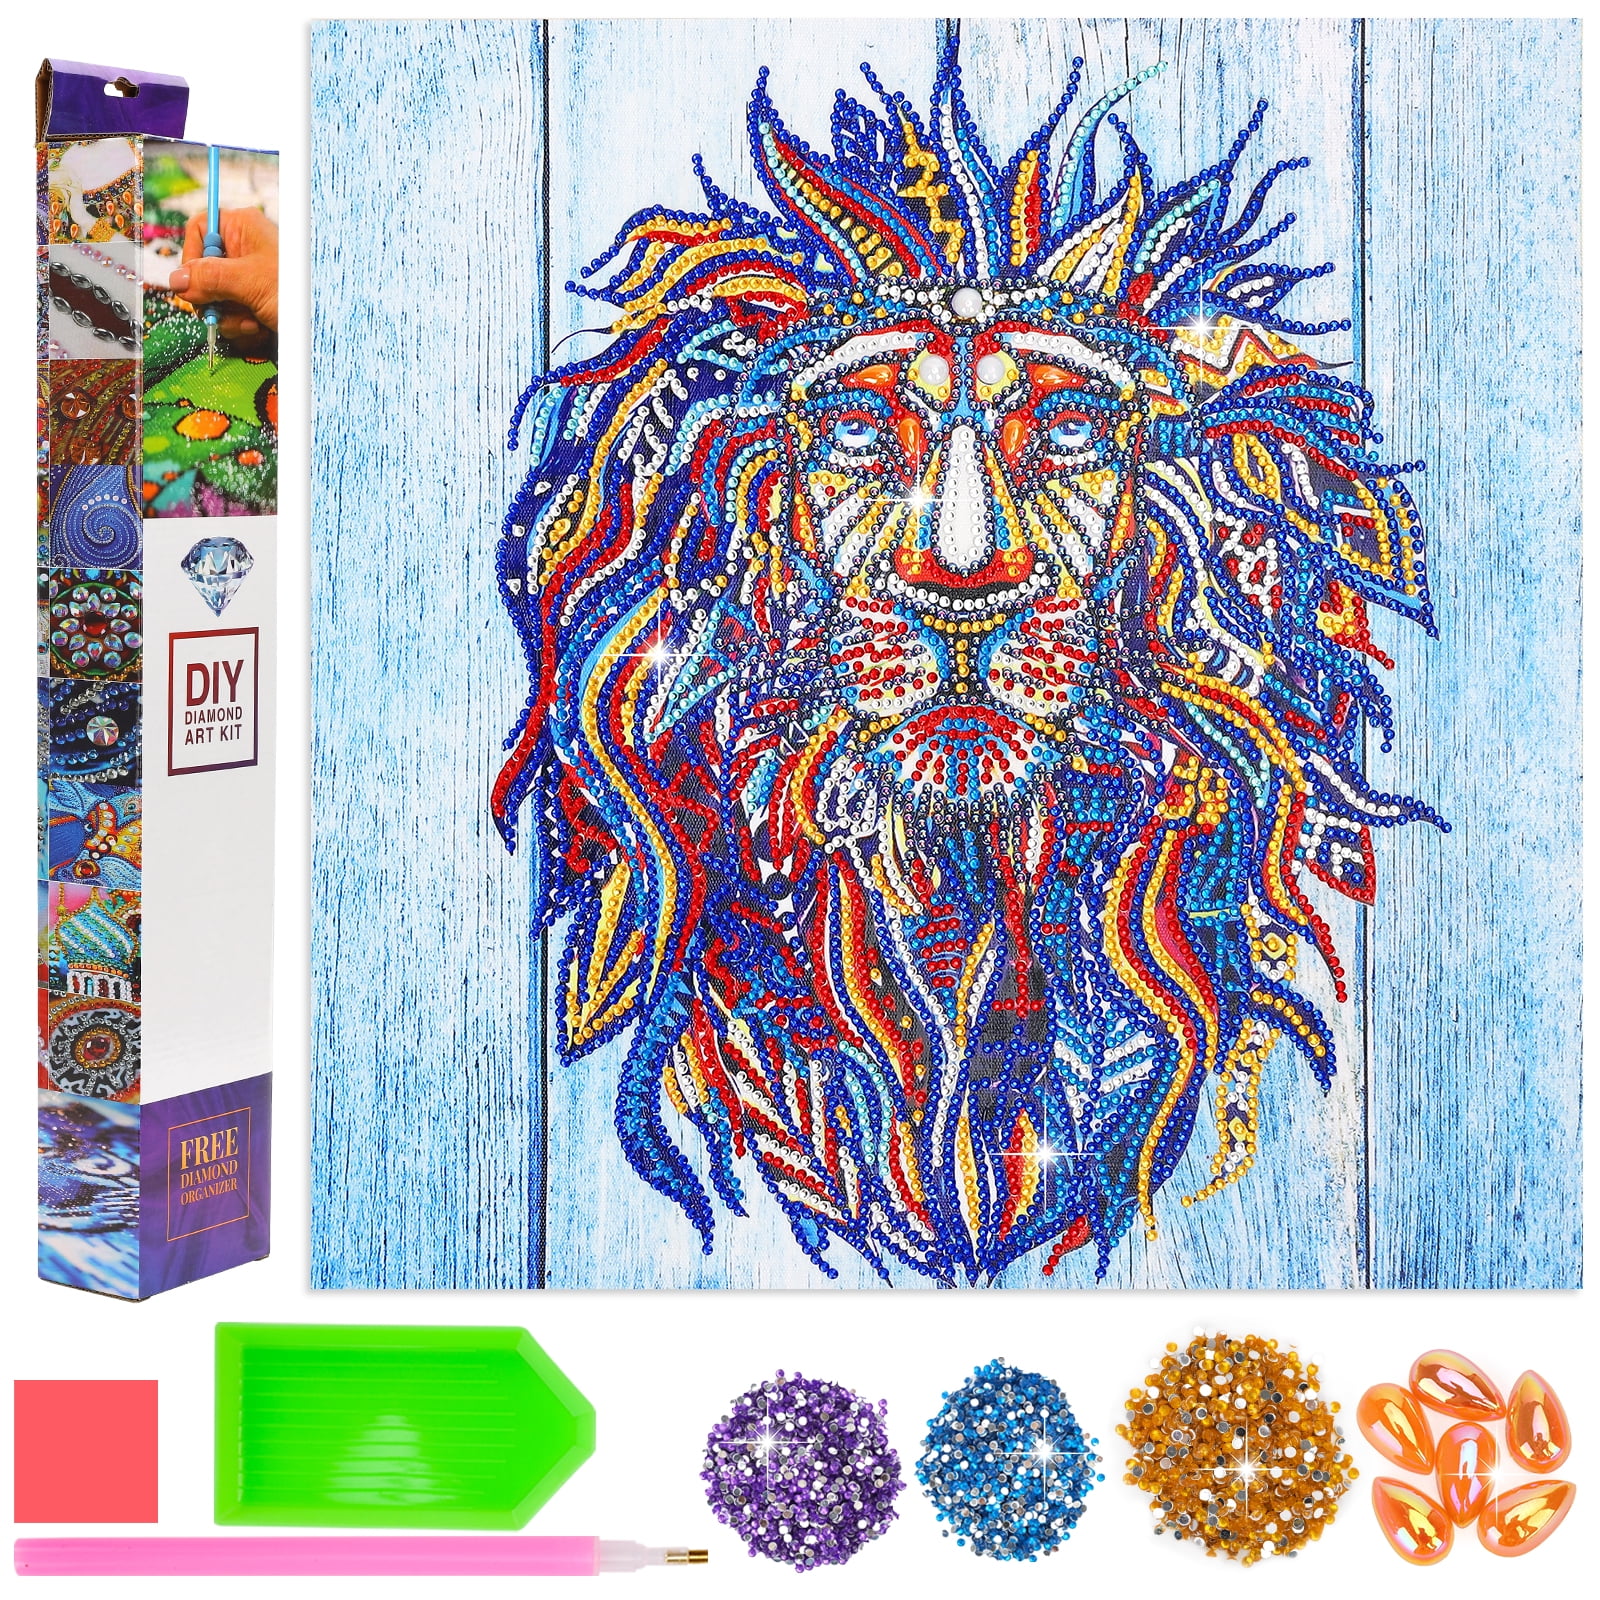 Arts and Crafts for Kids Ages 8-12 - 5D Diamond Painting Kits for Beginners  - Paint by Number Gem Keychains Birthday Valentines Day Gifts for Kids